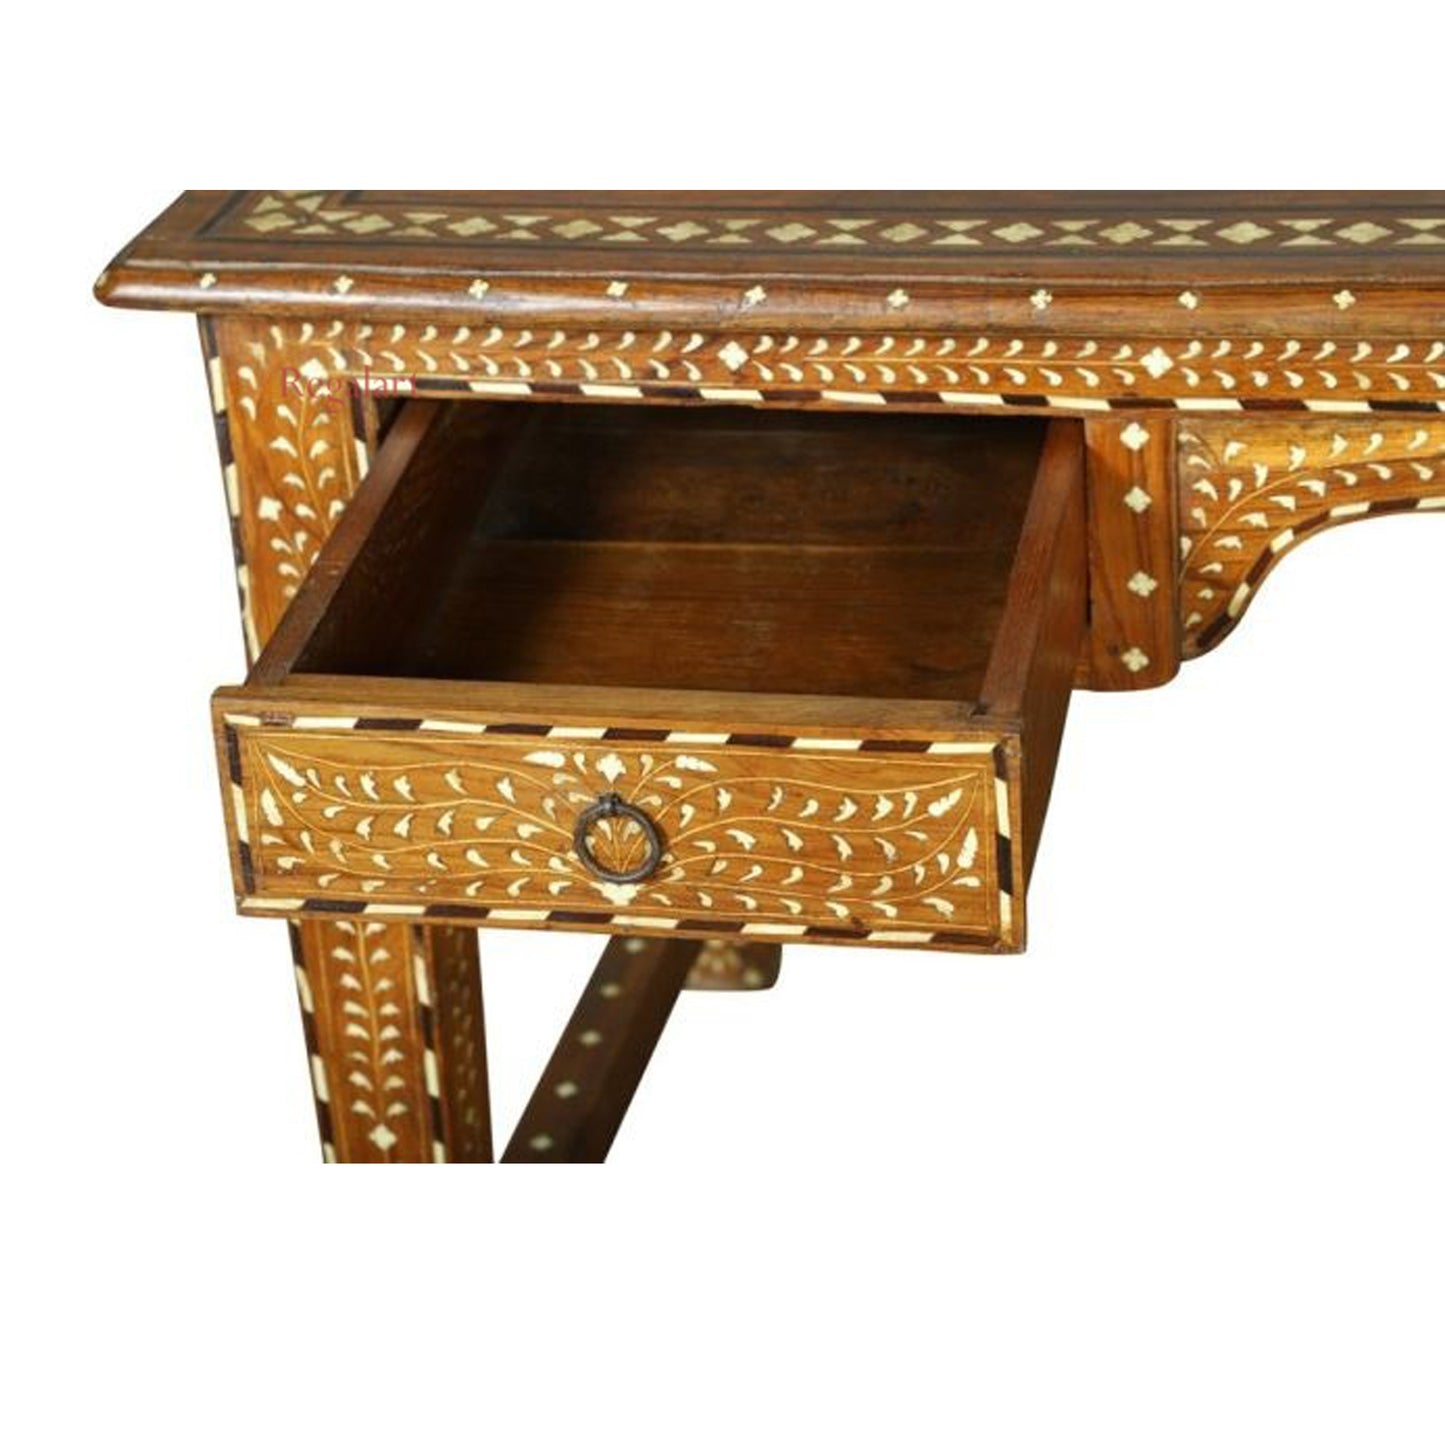 Wooden Carving Bone Inlay Desk Table Drawer Table Study Table Floral Pattern Home Decor Art